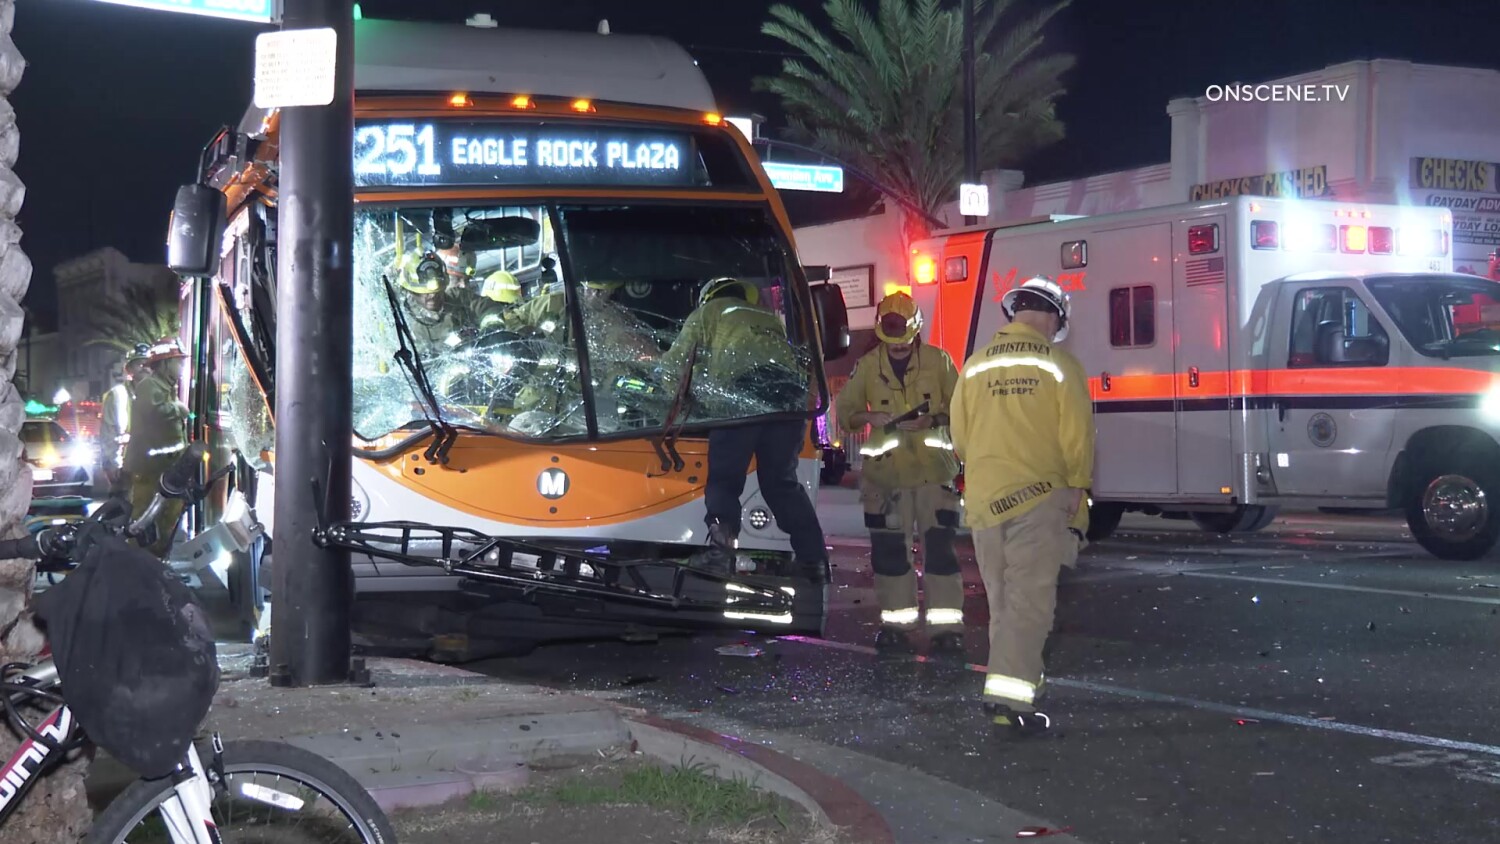 Hit-and-run crash with Metro bus injures 3 in Huntington Park